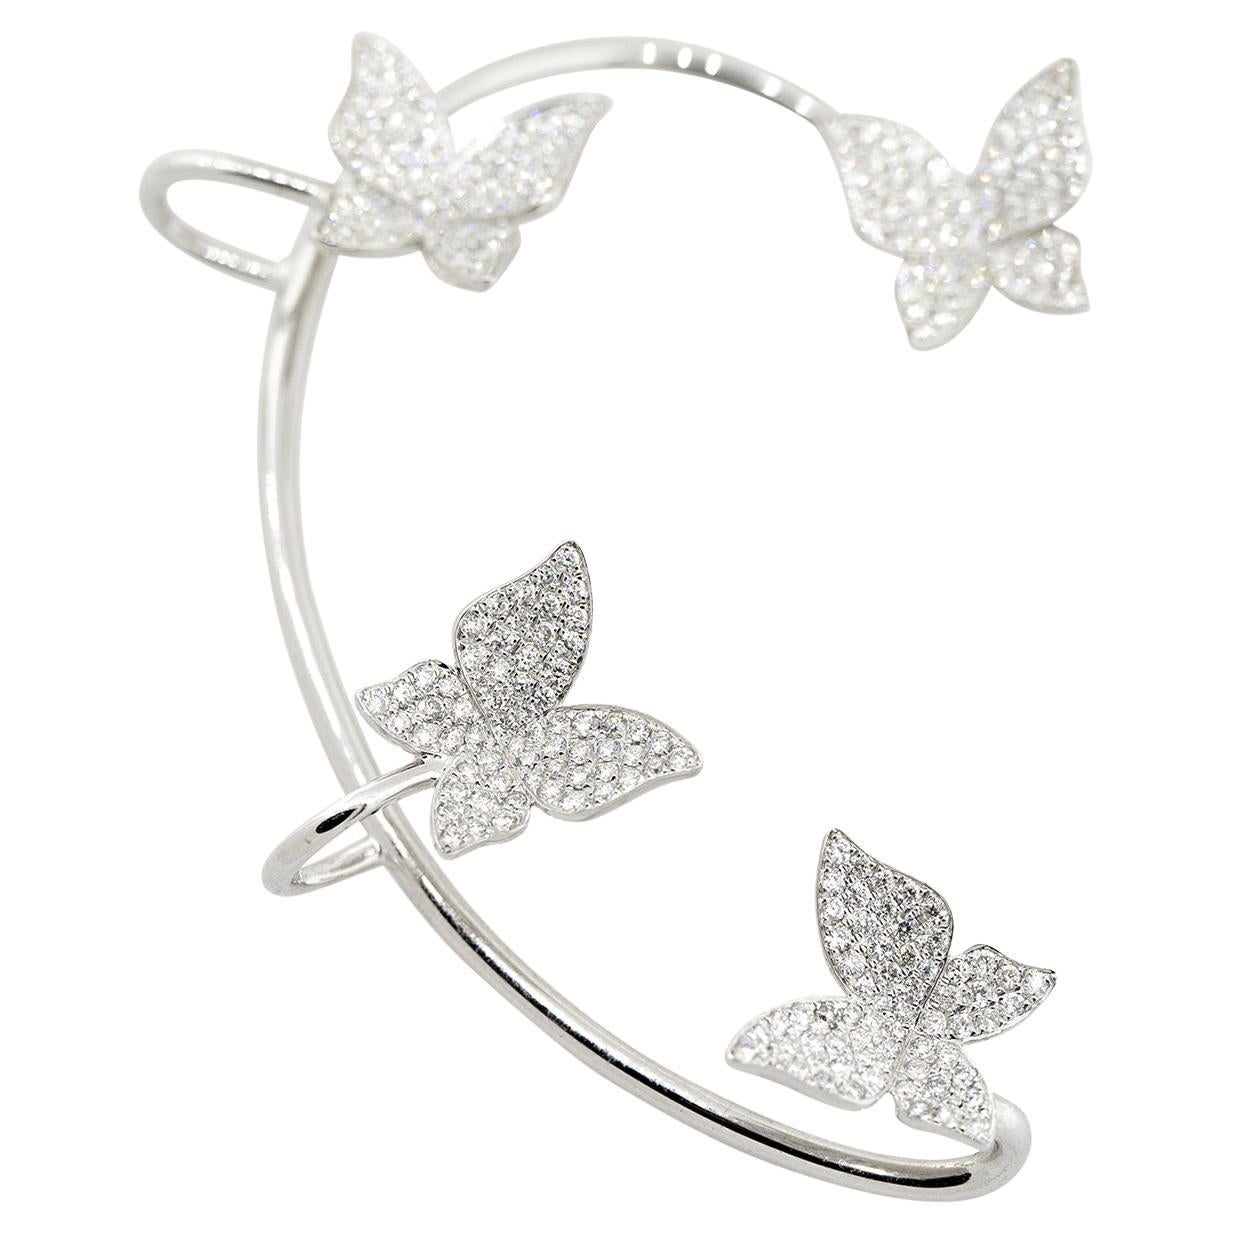 14k White Gold 0.97ctw Pave Diamond Butterfly Ear Cuff
Material: 14k White Gold
Diamond Details: Diamonds are approximately 0.97ctw of Pave Set, Round Brilliant cut Diamonds. There are 4 pave butterflies set along the ear cuff. All diamonds are